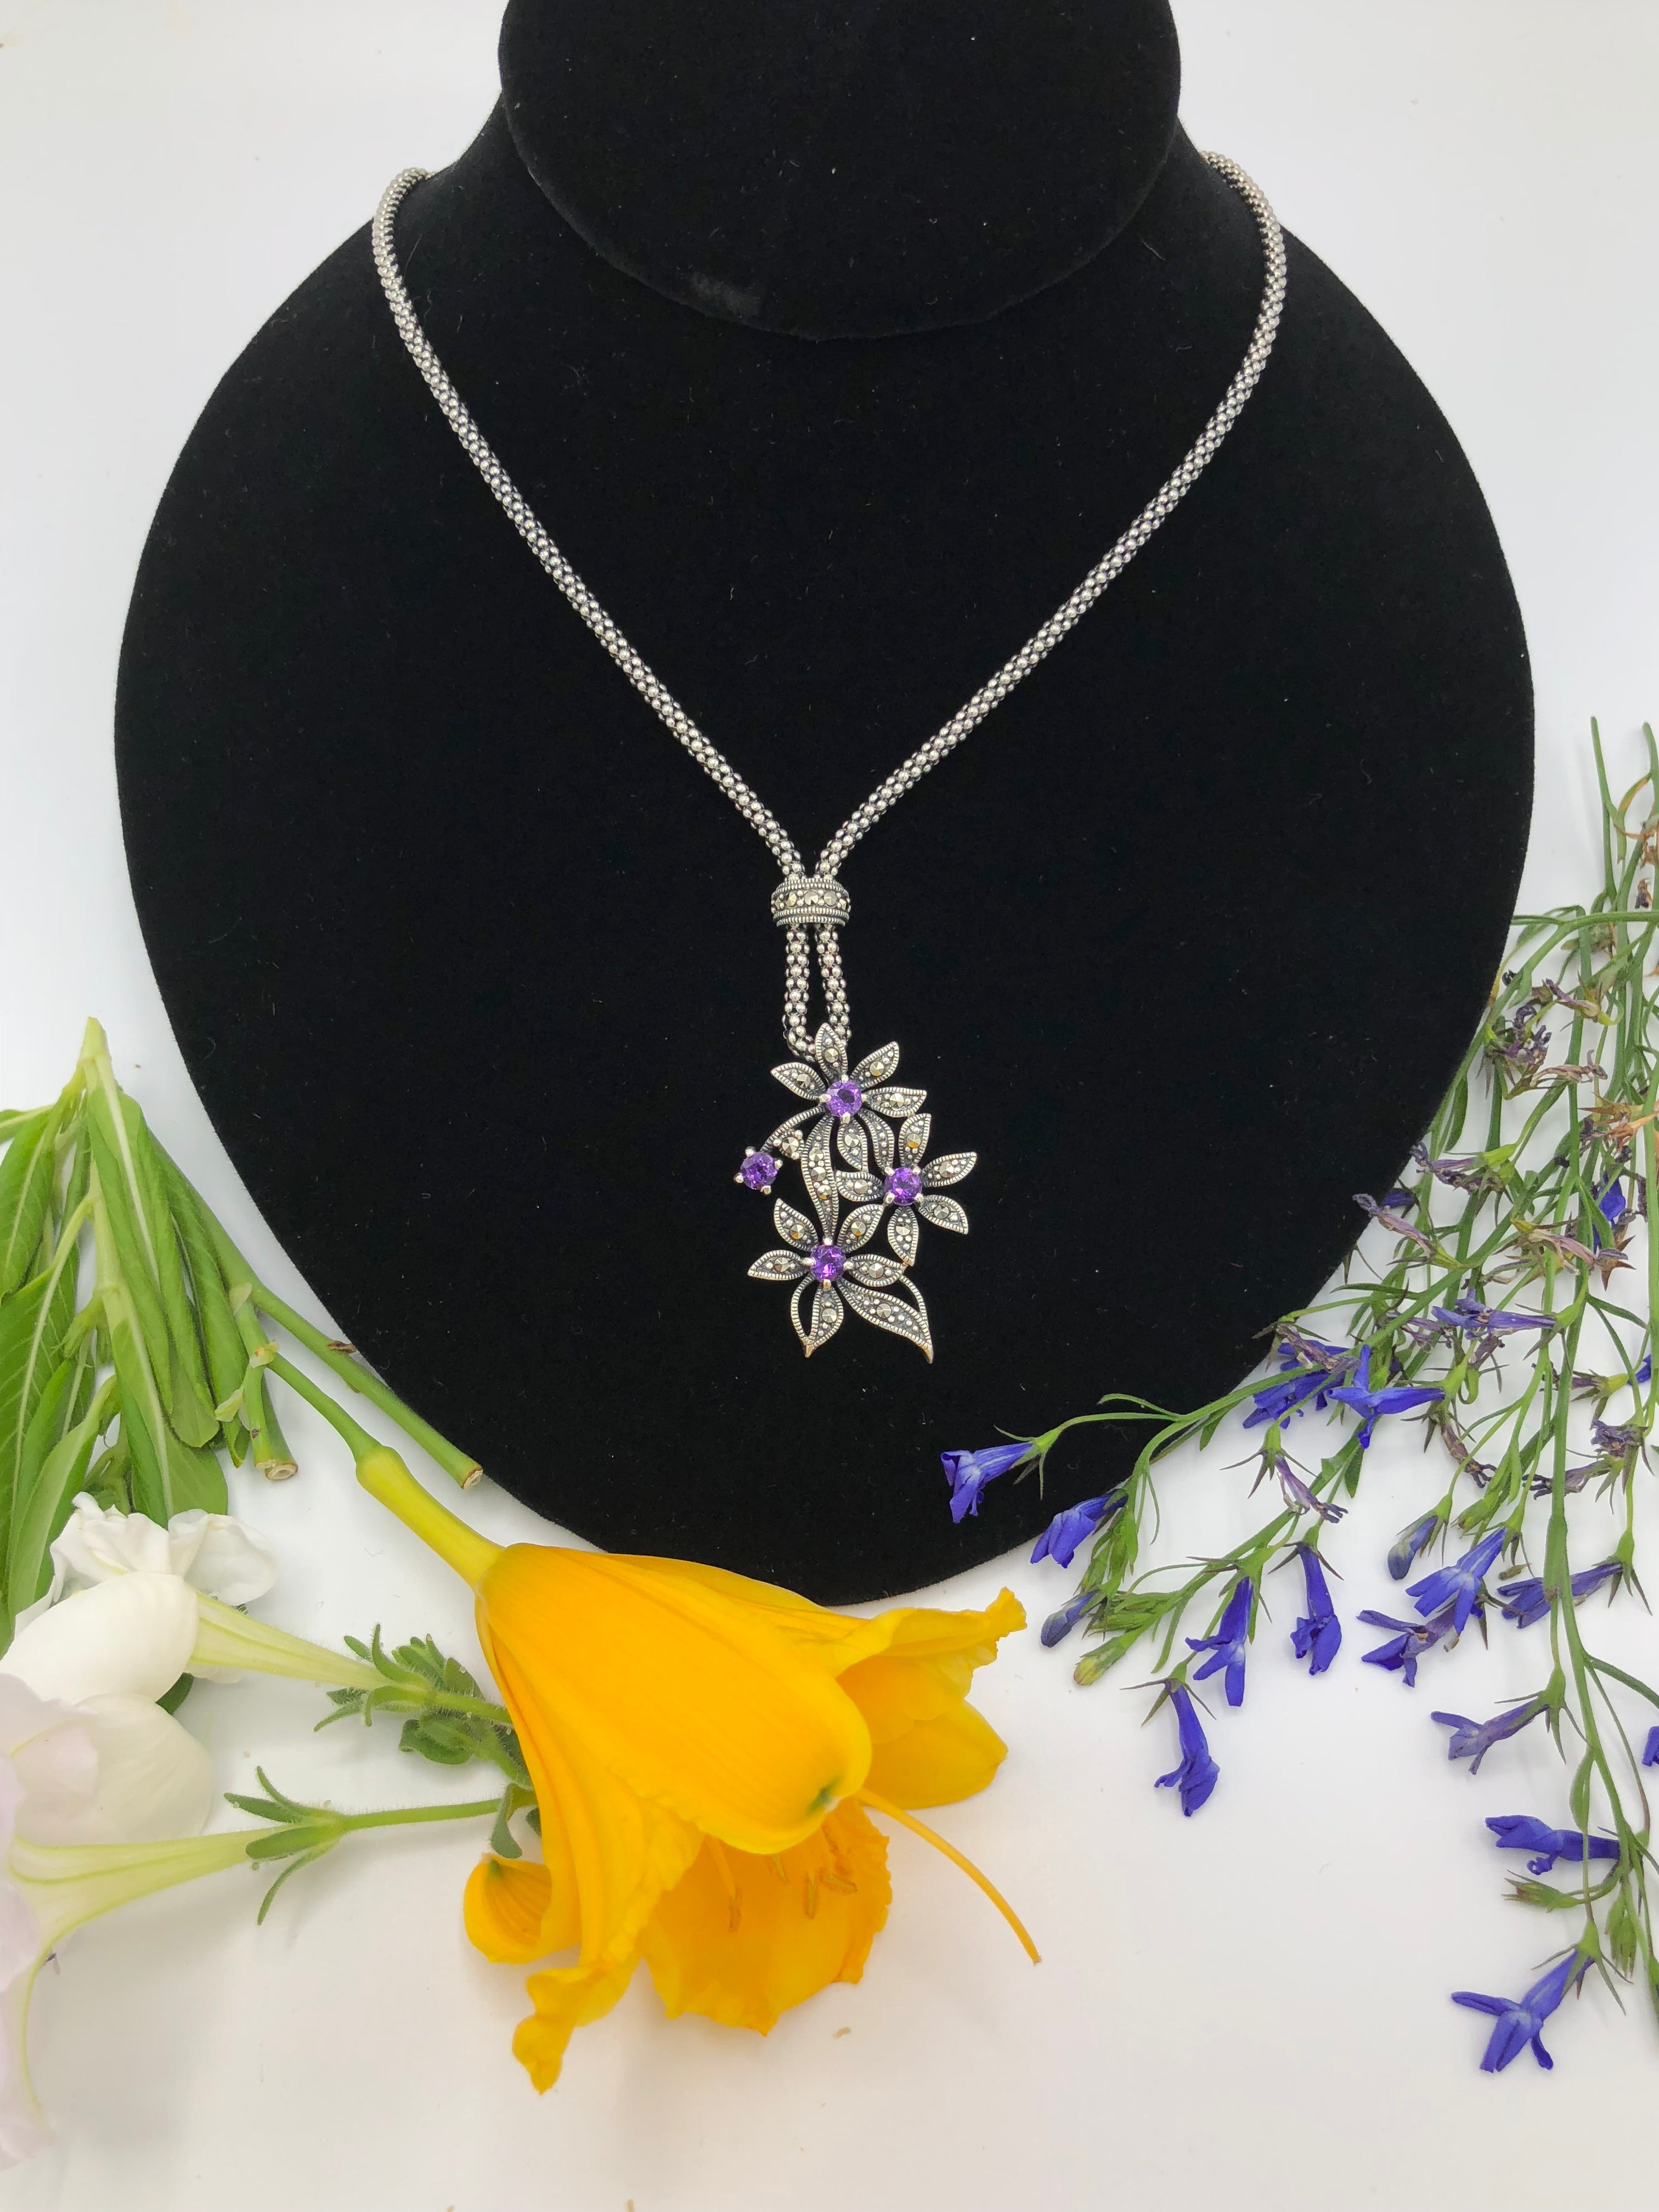 Flower Necklace with stones